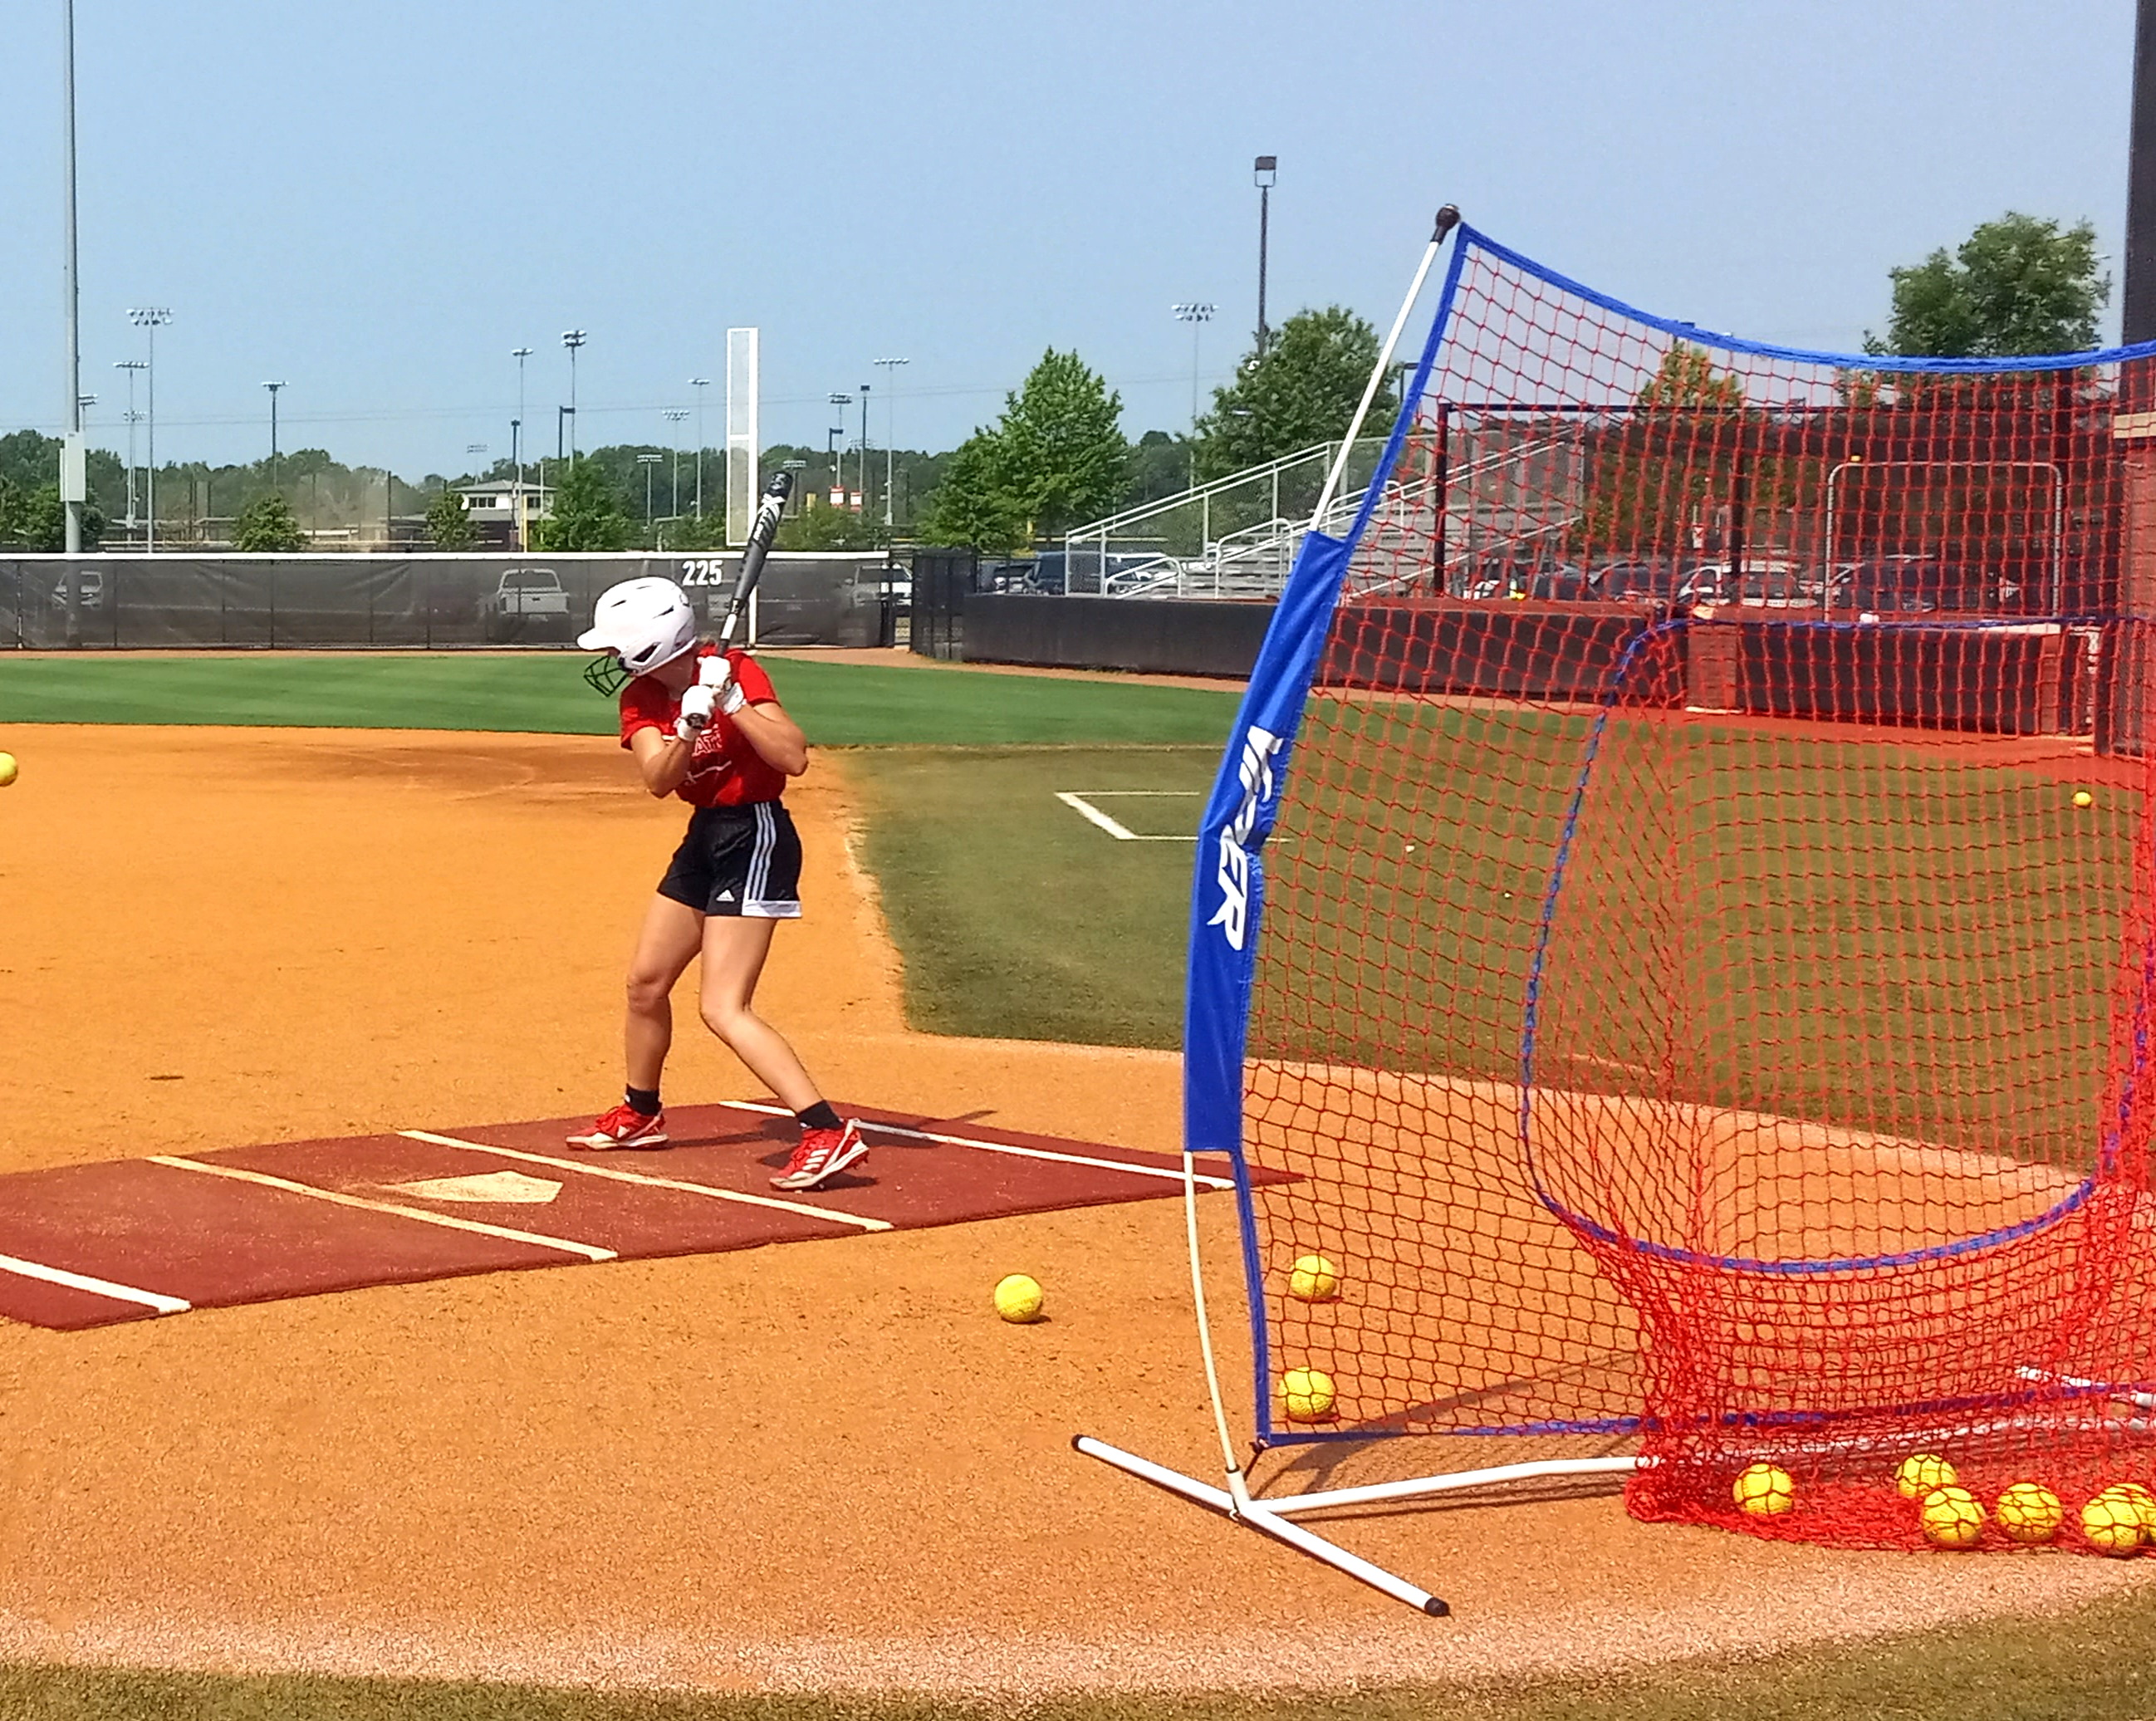 Former White Plains High School and current Jacksonville State University player Emma Jones sizes up a pitch during Wednesday’s Smash it Sports Vipers practice at Choccolocco Park. (Photo by Joe Medley)